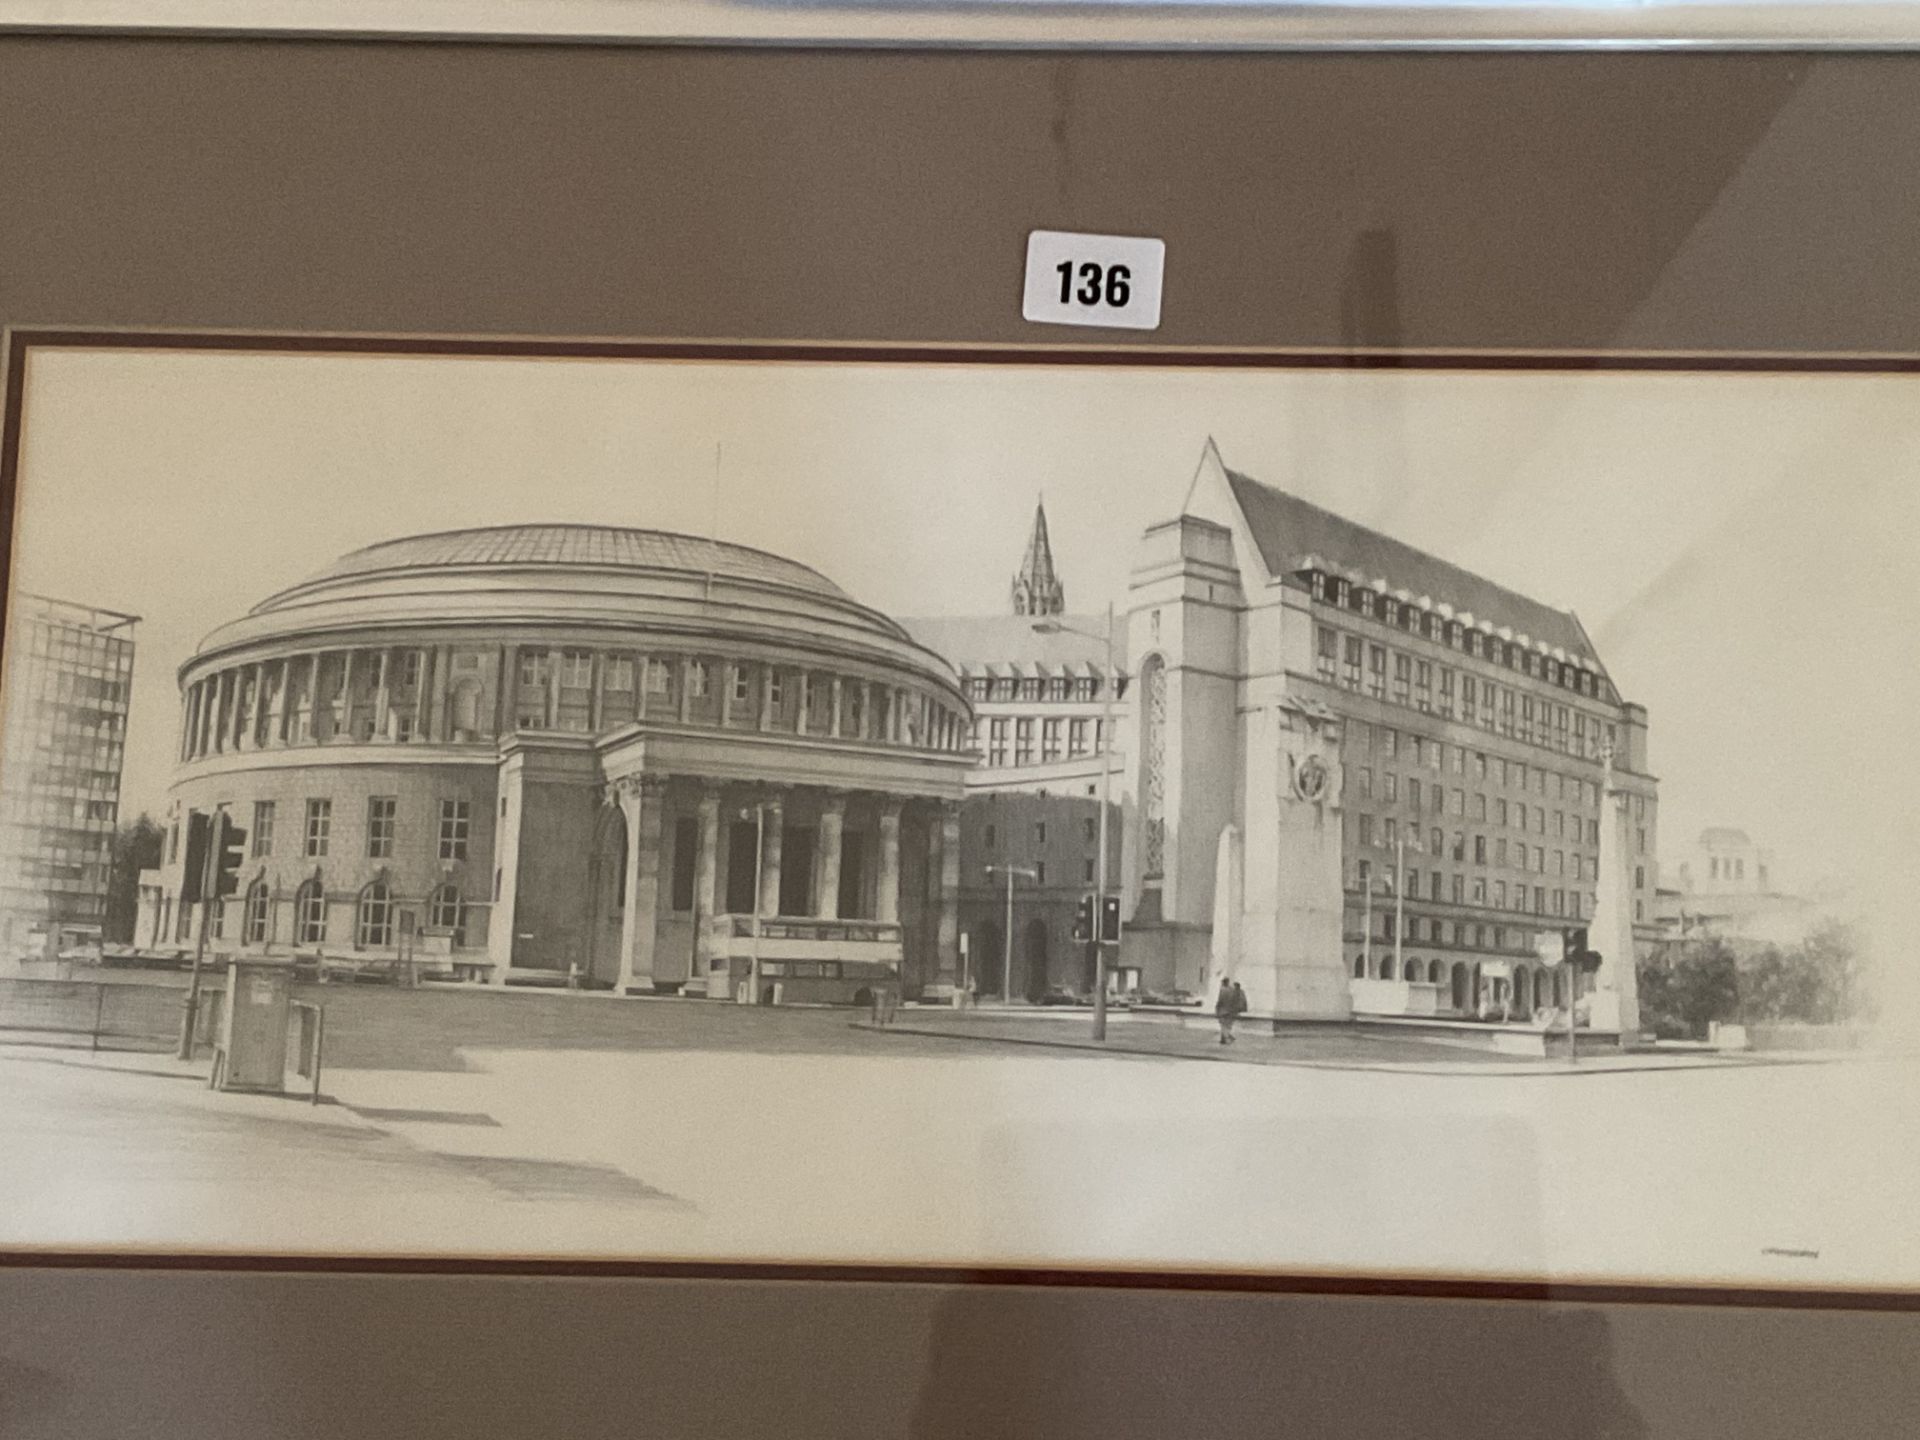 Grimshaw Print | Central Library & Cenotaph Manchester - Image 2 of 3